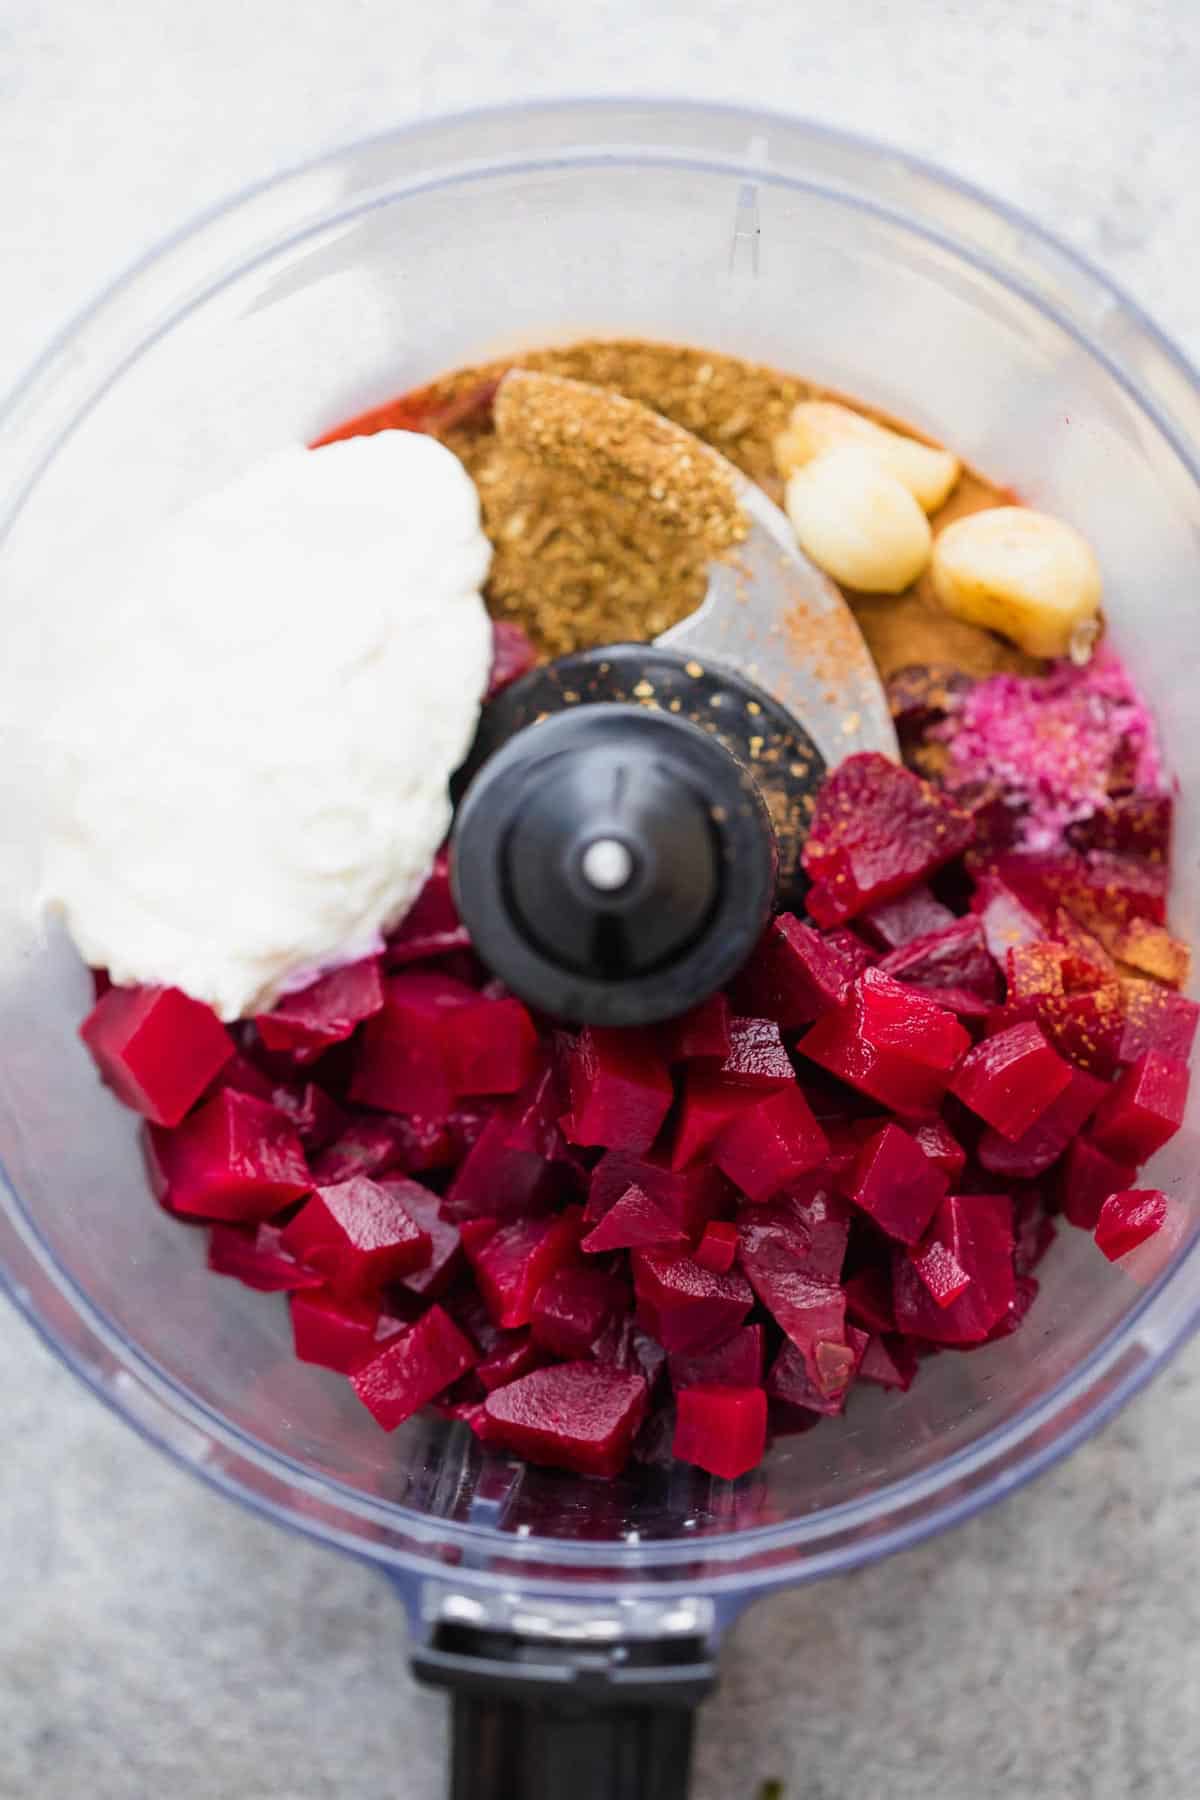 Ingredients of the egyptian beetroot dip in the food processor, just before they were blended